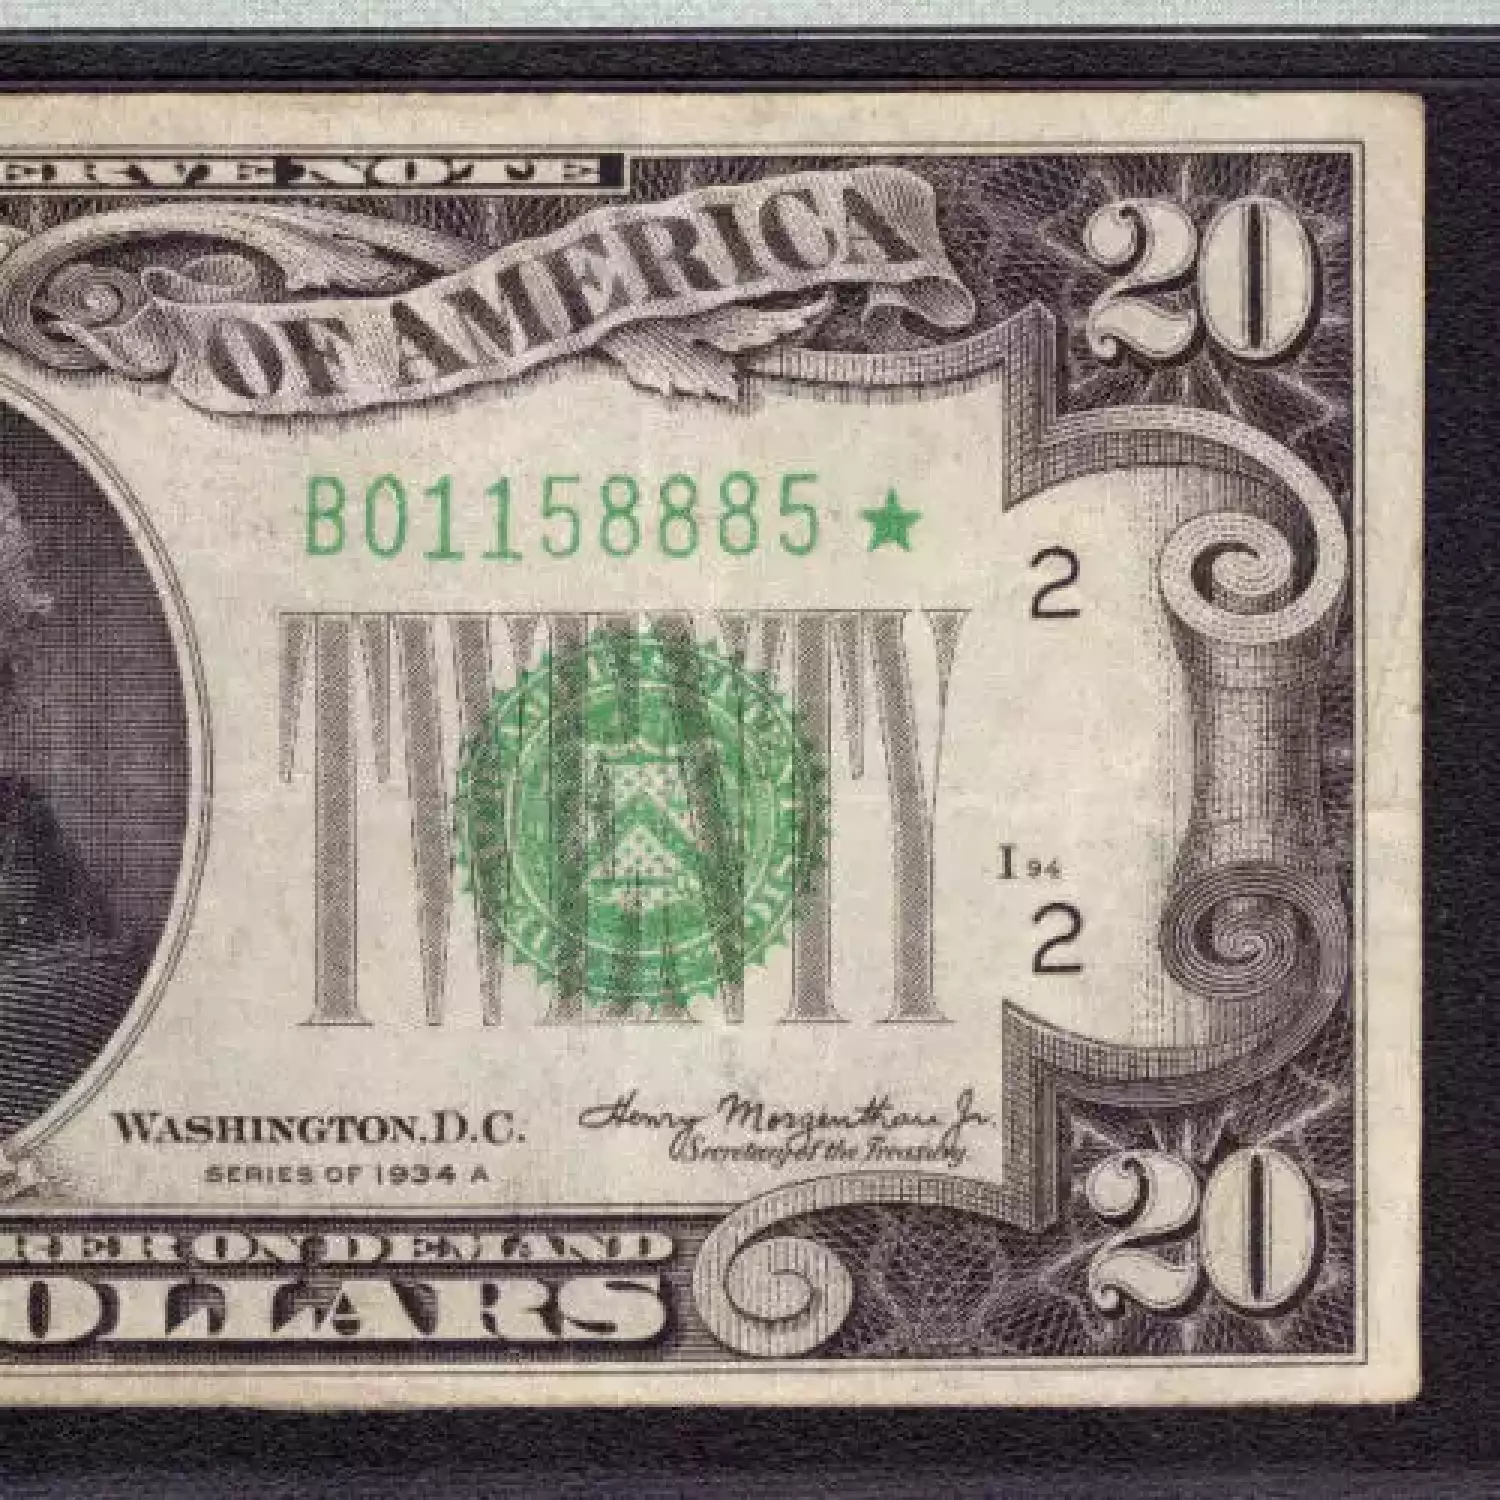 $20 1934-A. blue-Green seal. Small Size $20 Federal Reserve Notes 2055-B* (3)